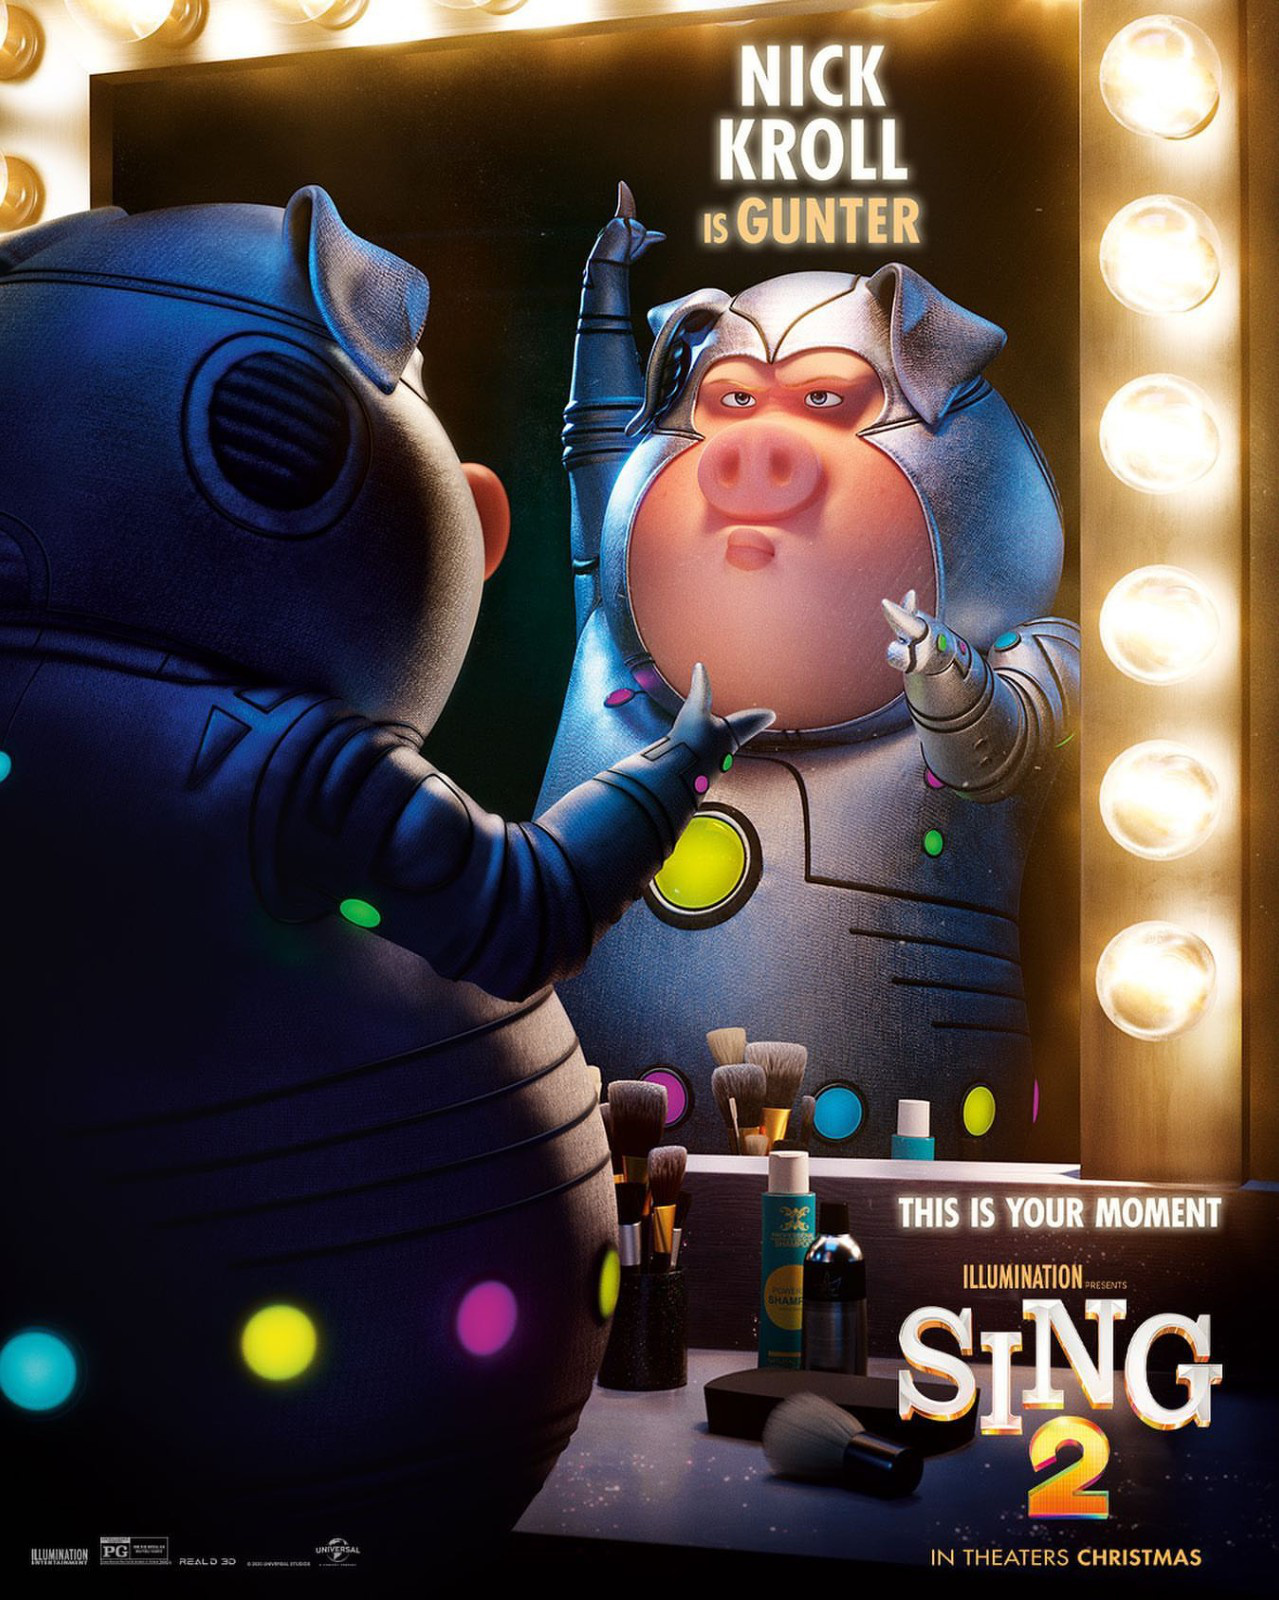 Musical Comedy 'Sing' Reveals Animated Animal Characters | Collider